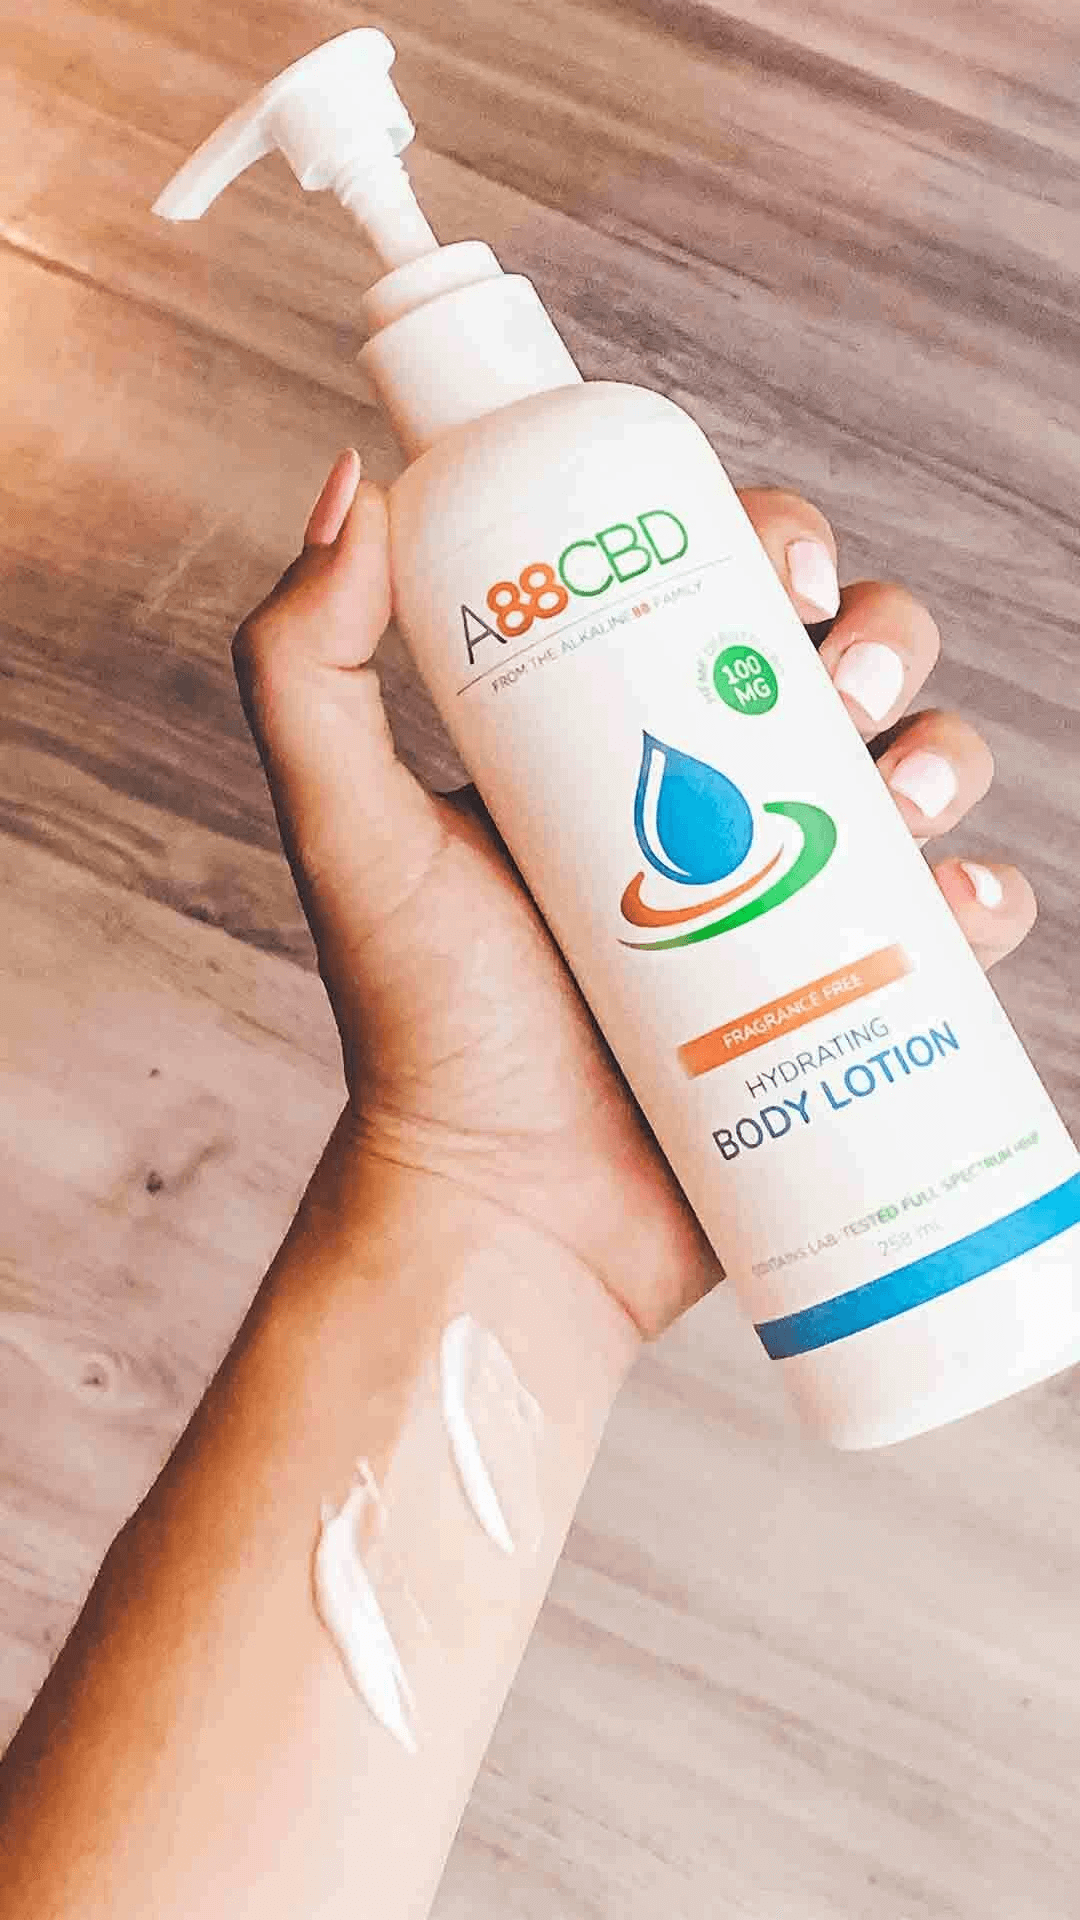 Alkaline88 Body Lotion (a Lotion) made by Alkaline88 sold at CBD Emporium